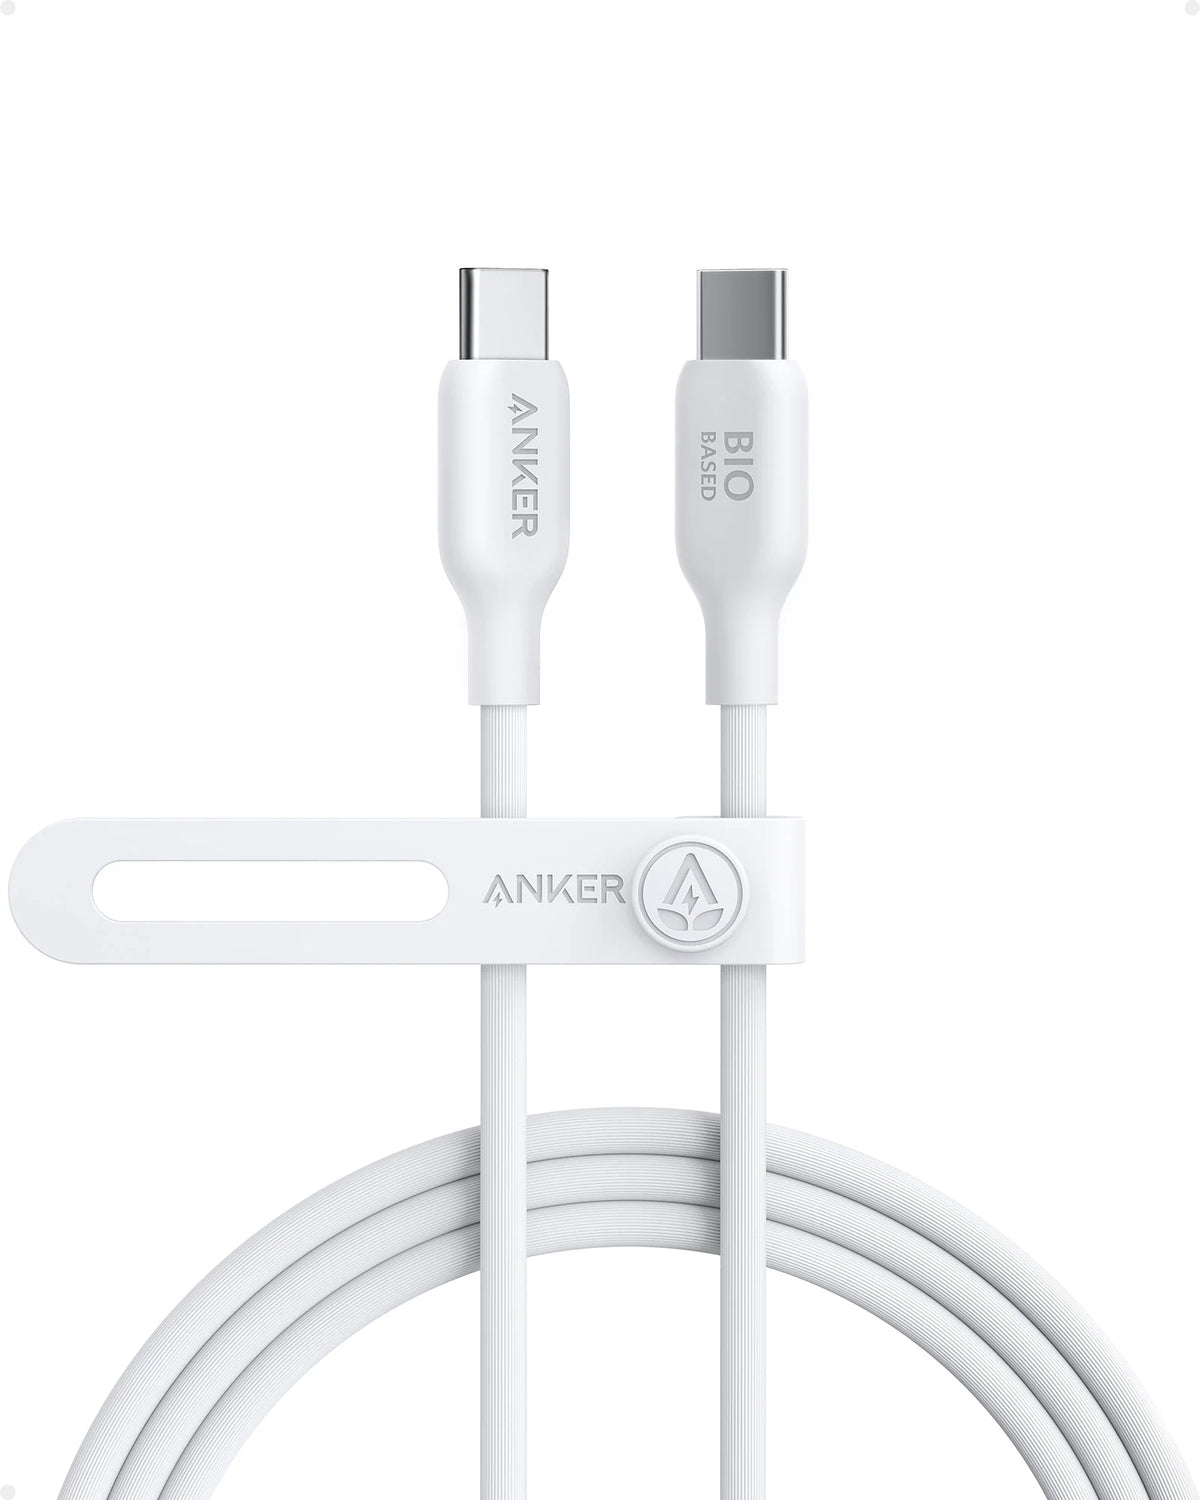 Anker Prime 20,000mAh Power Bank ×2 and Anker &lt;b&gt;543&lt;/b&gt; USB-C to USB-C Cable (Bio-Based) ×2